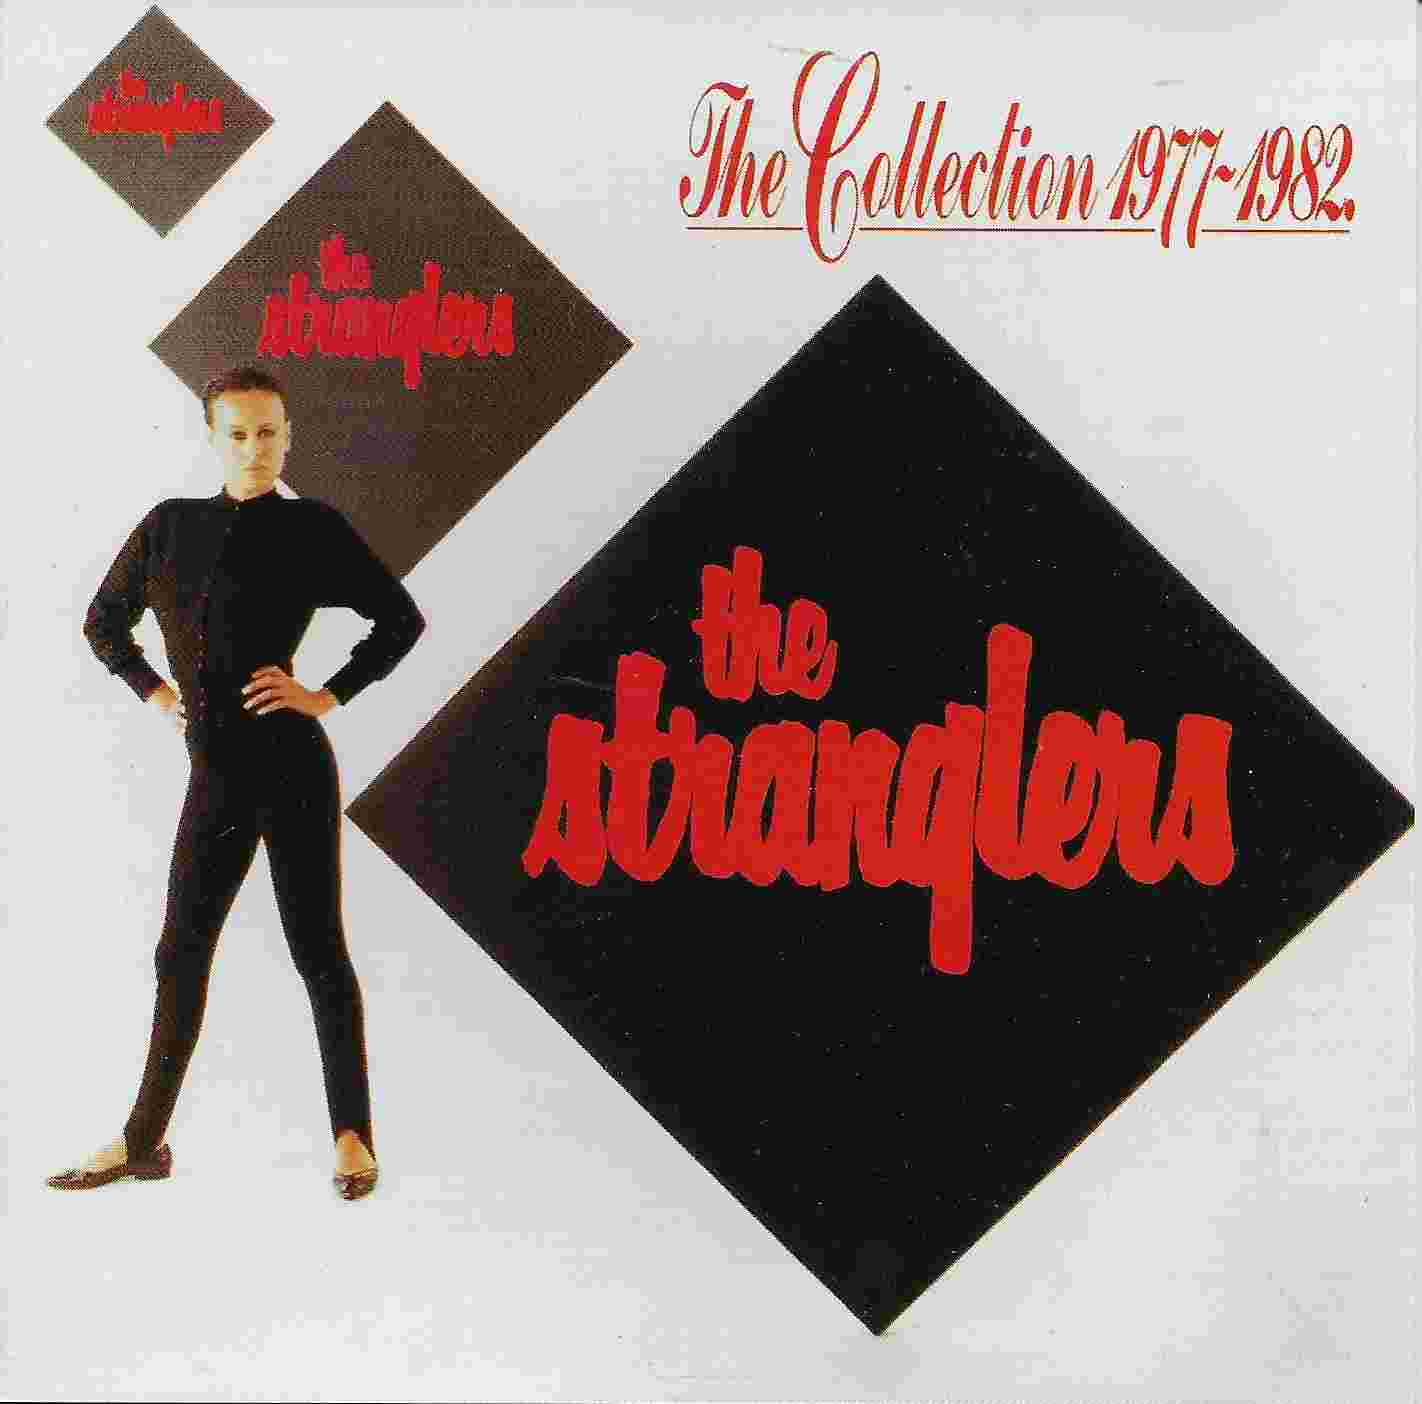 Picture of The collection 1977 - 1982 by artist The Stranglers from The Stranglers cds